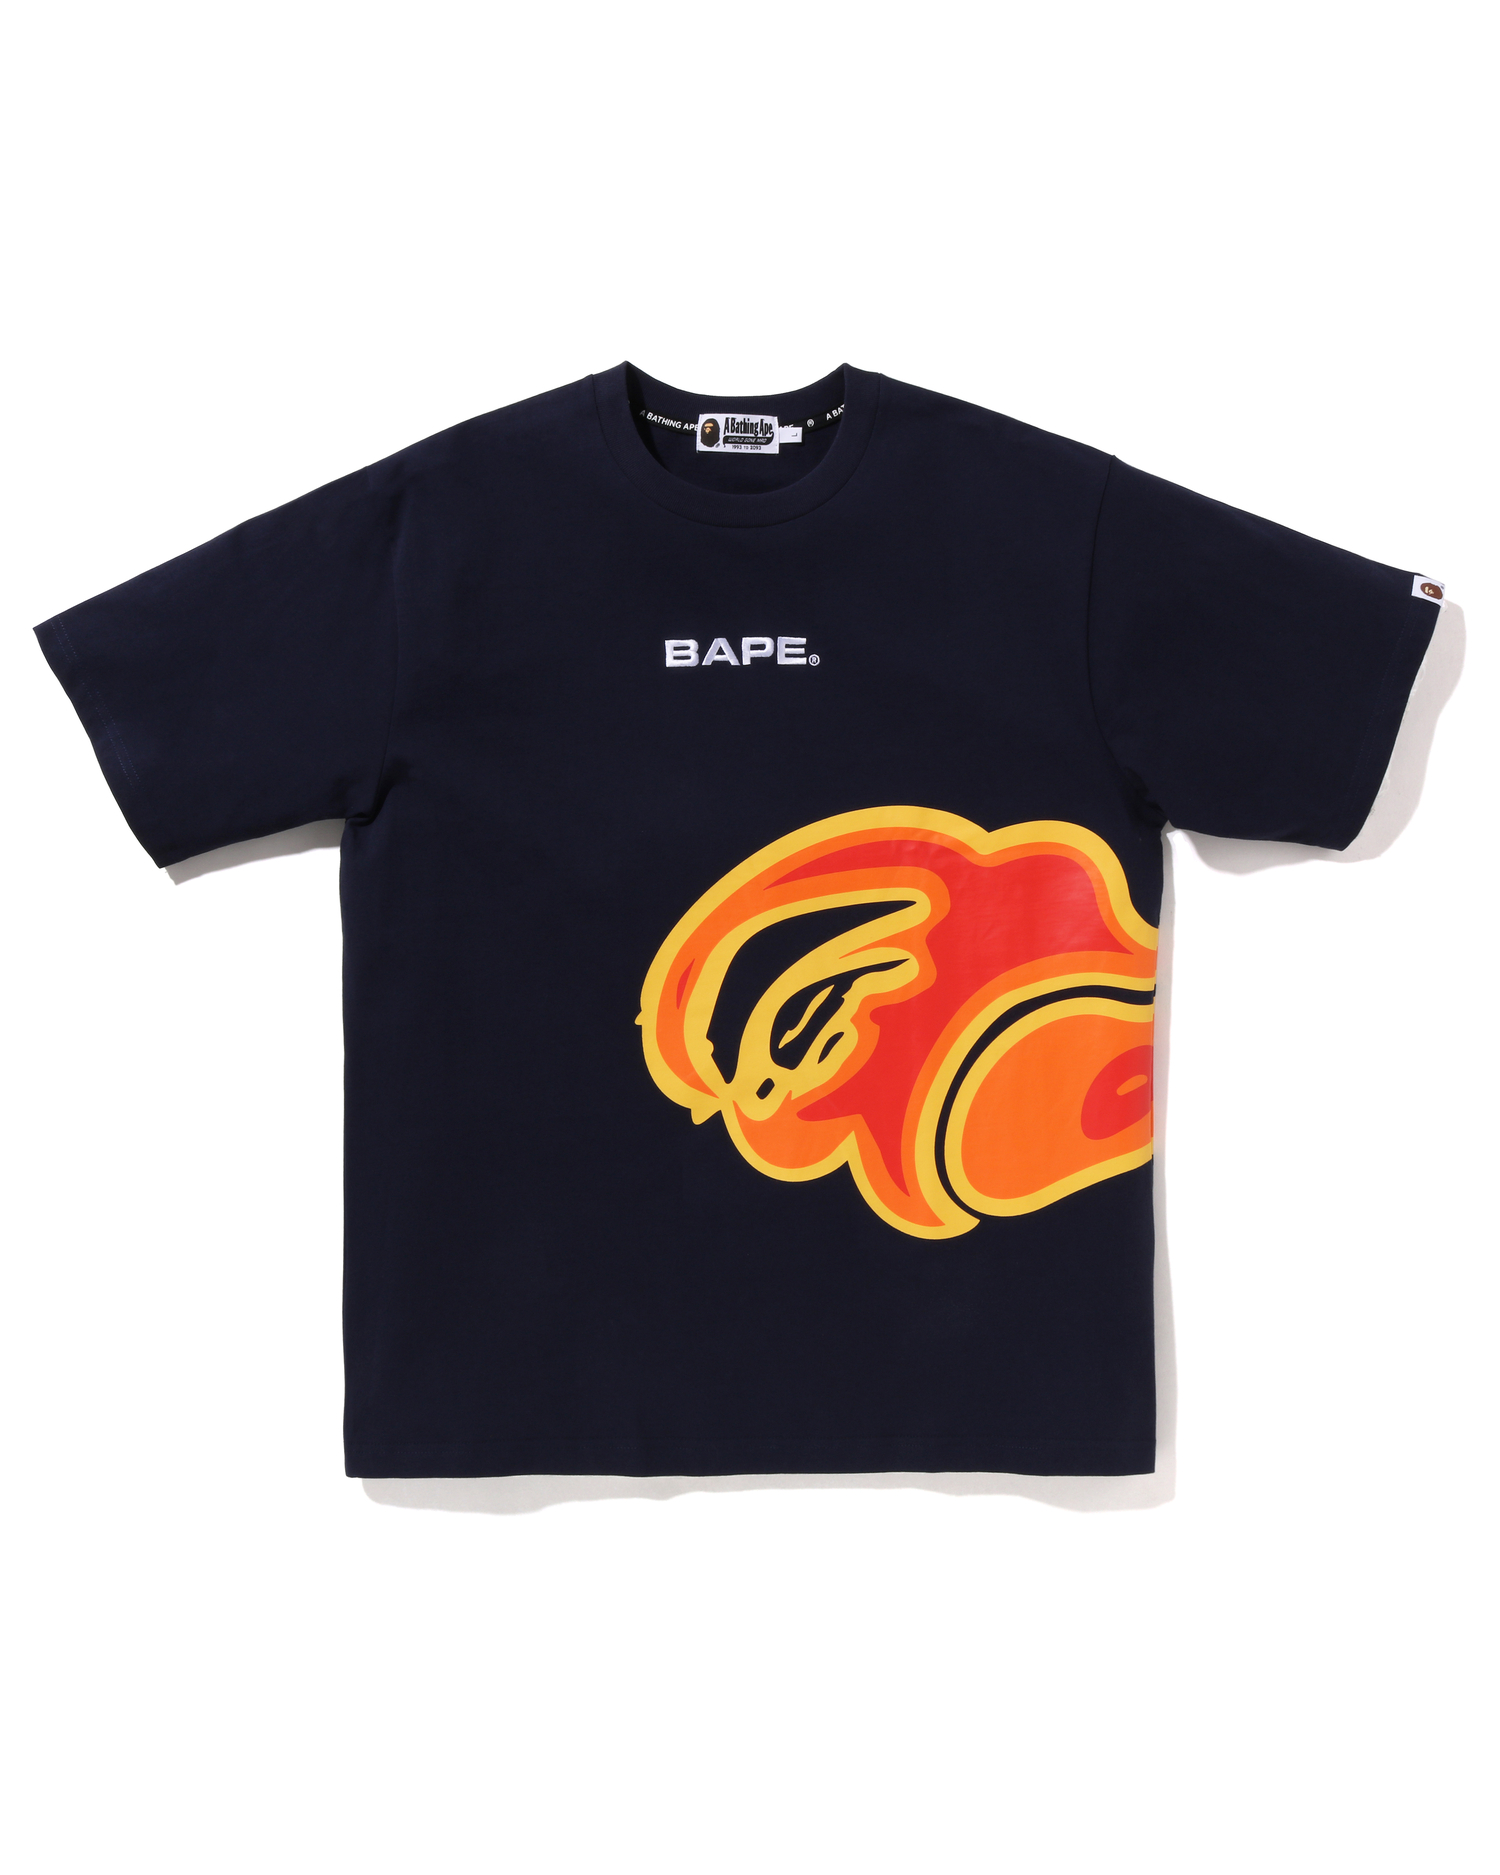 Shop ABC Camo Thermography Relaxed Fit Tee Online | BAPE